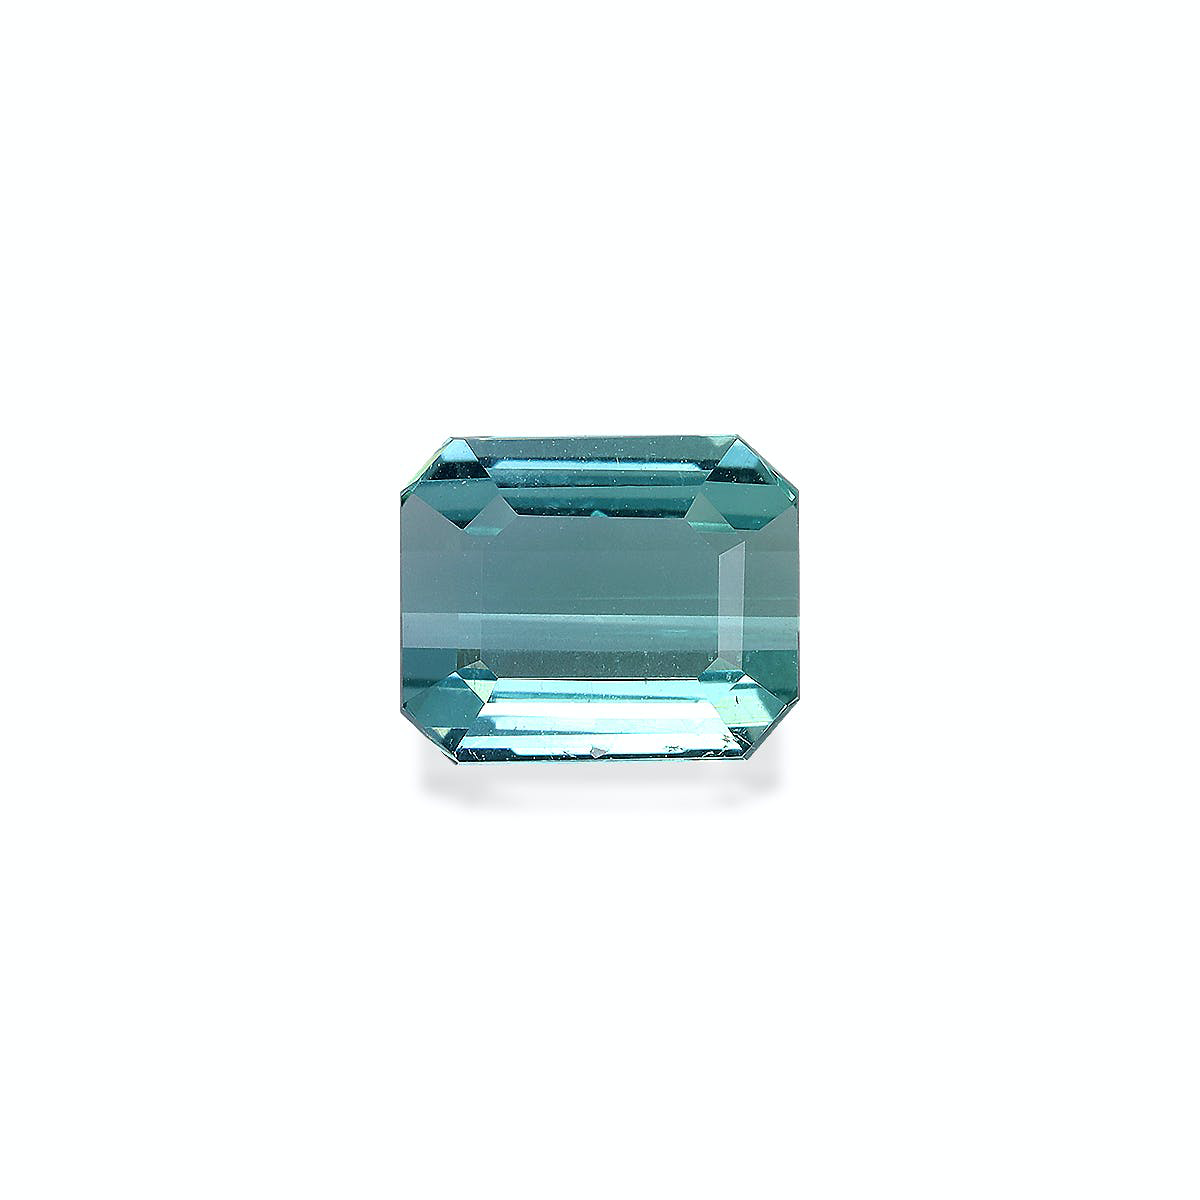 Picture of Ocean Blue Tourmaline 1.47ct (TB0218)